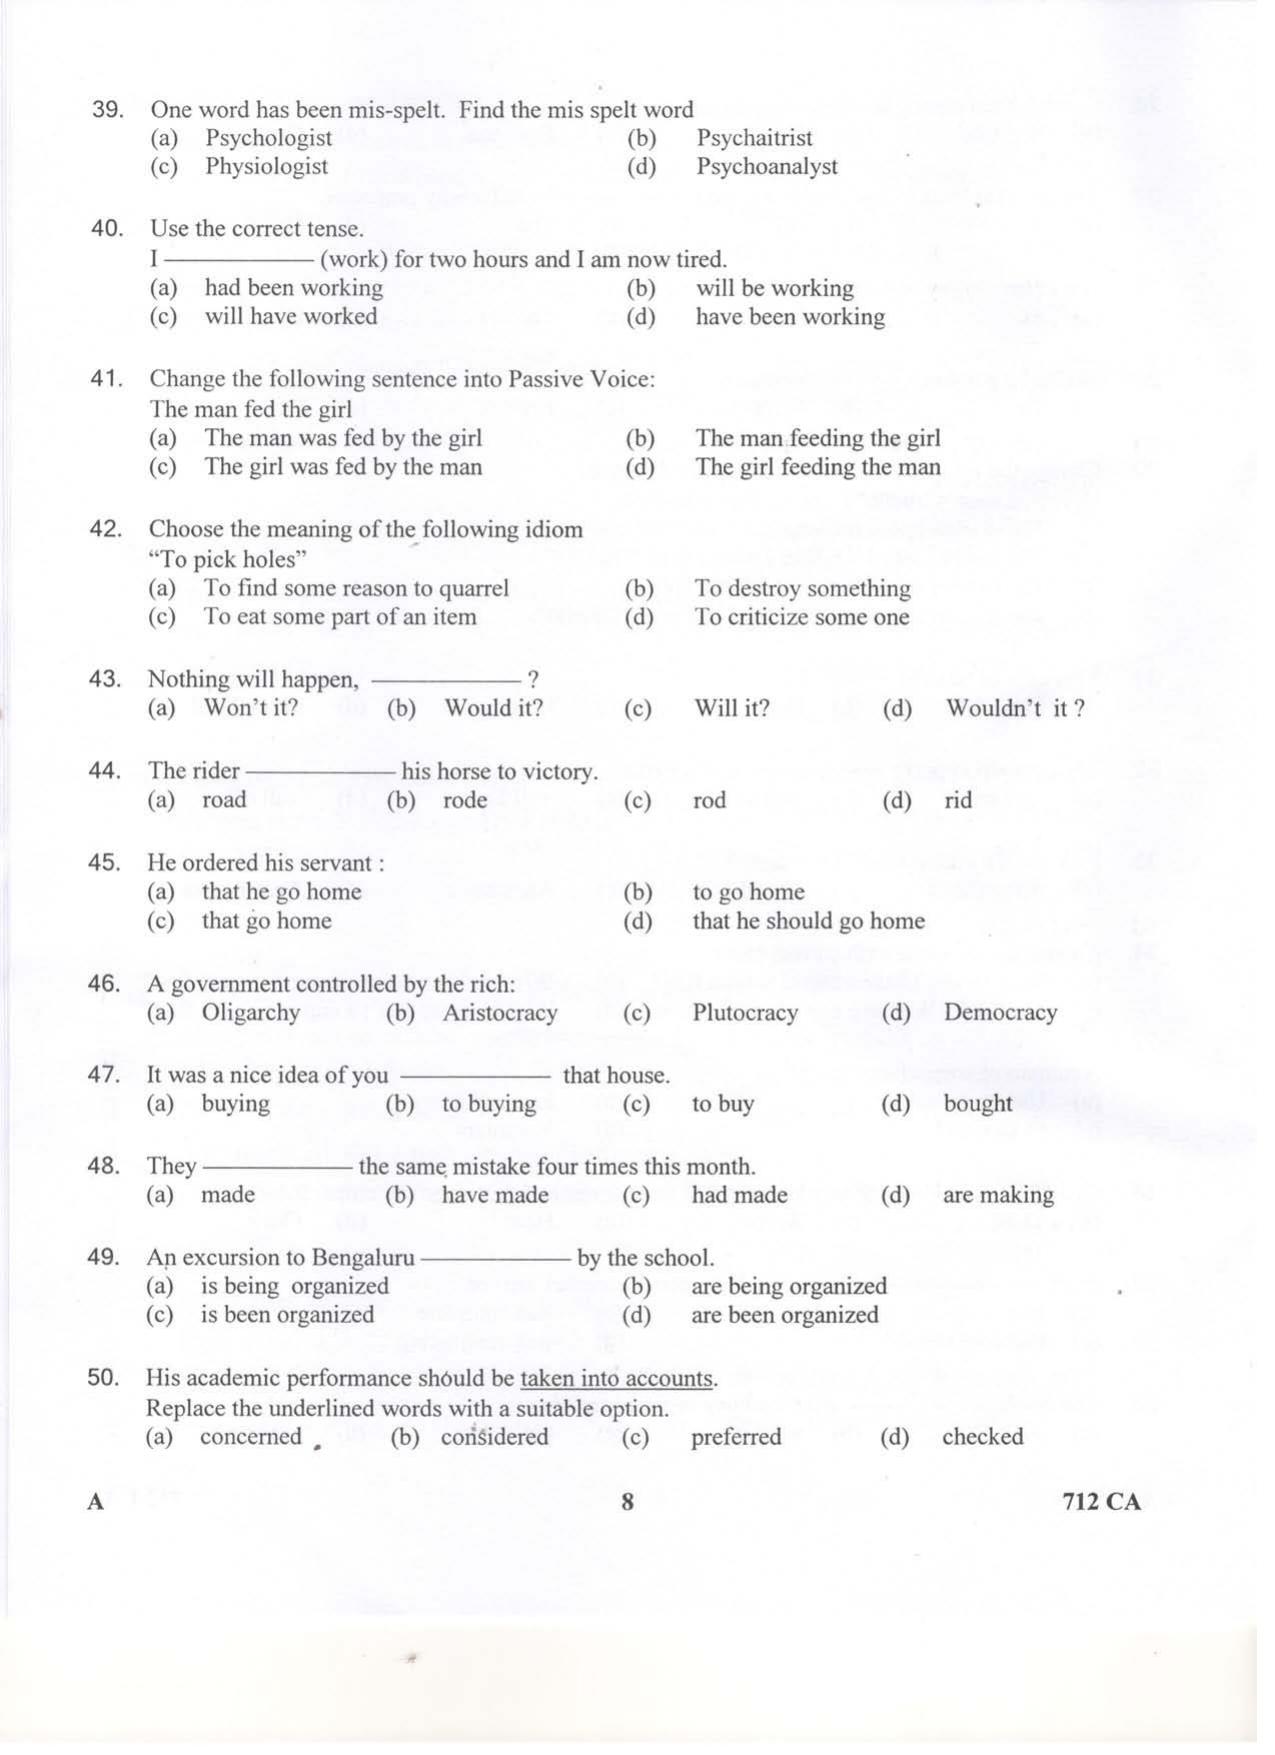 LPSC Catering Attendant ‘A’ 2019 Question Paper - Page 8